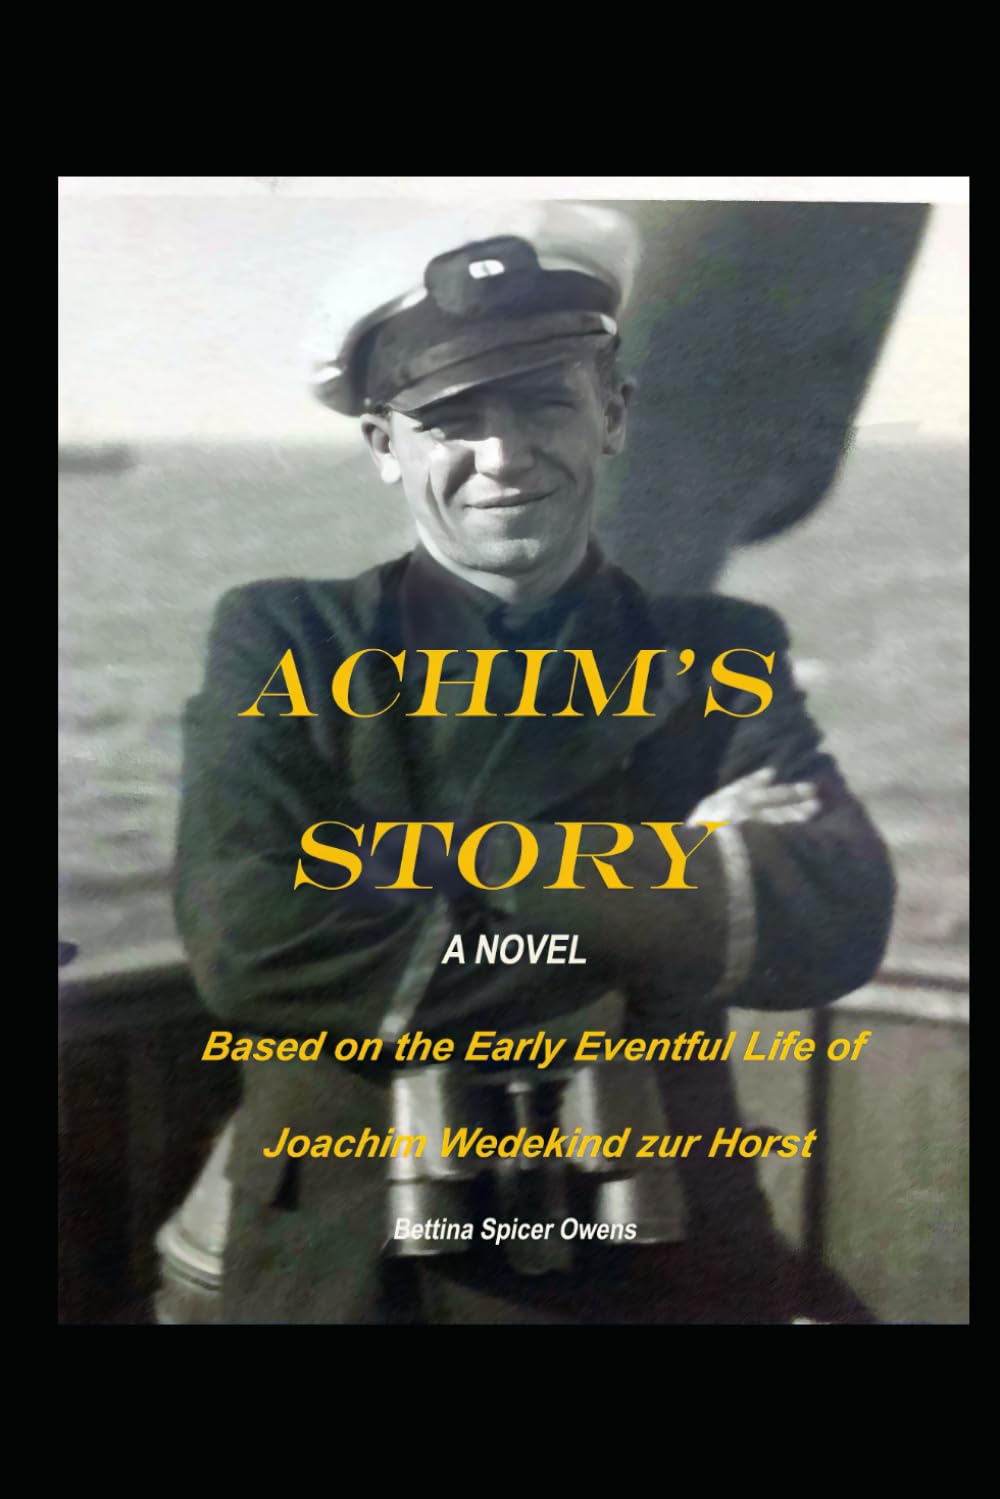 From Upper-Class German Boy to Steuben Survivor: A Gripping True Story Comes Alive in "Achim's Story"